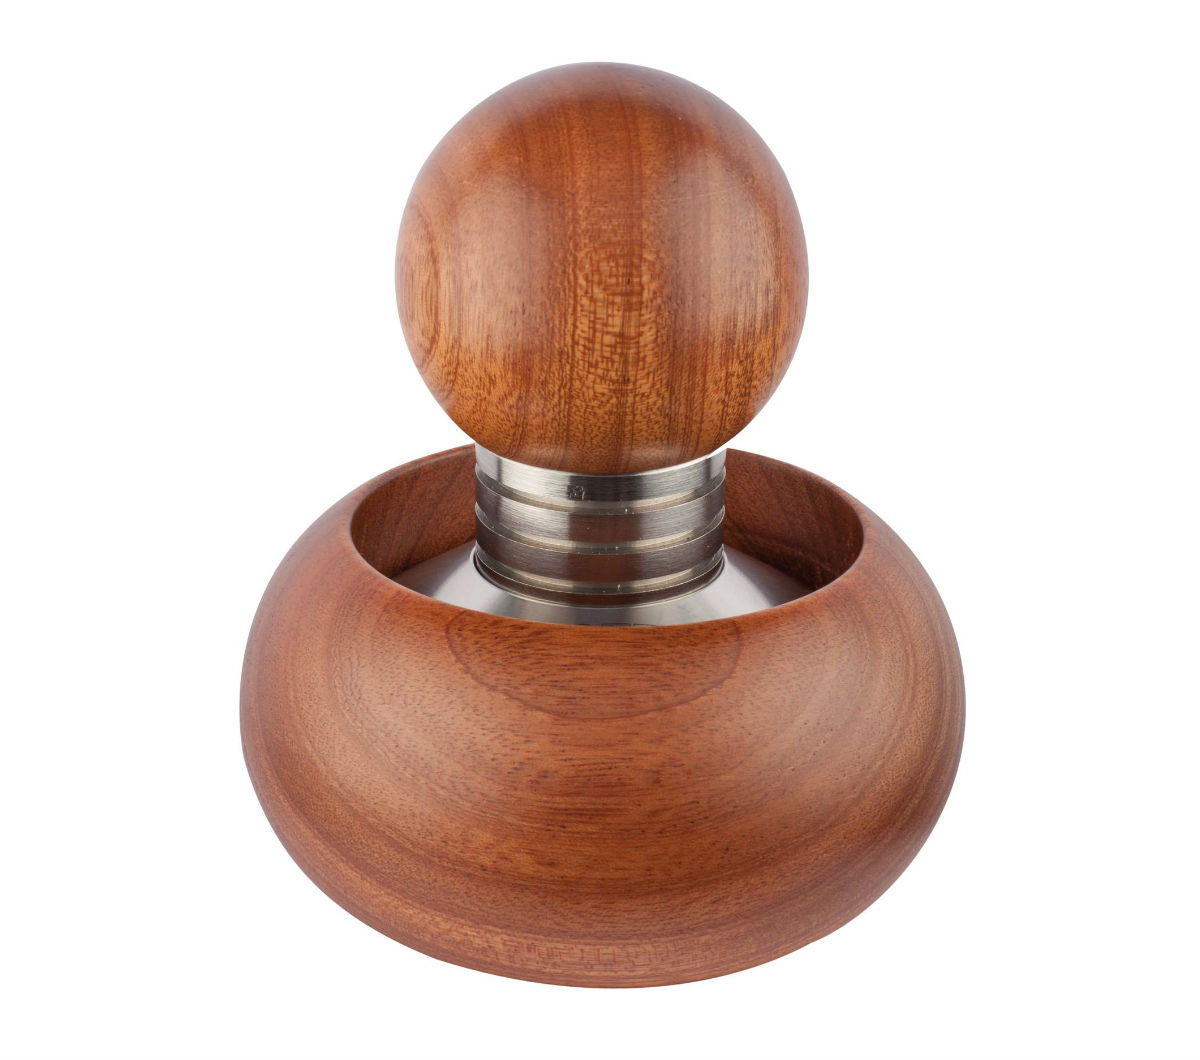 Tamper "BOUBLE" with holder